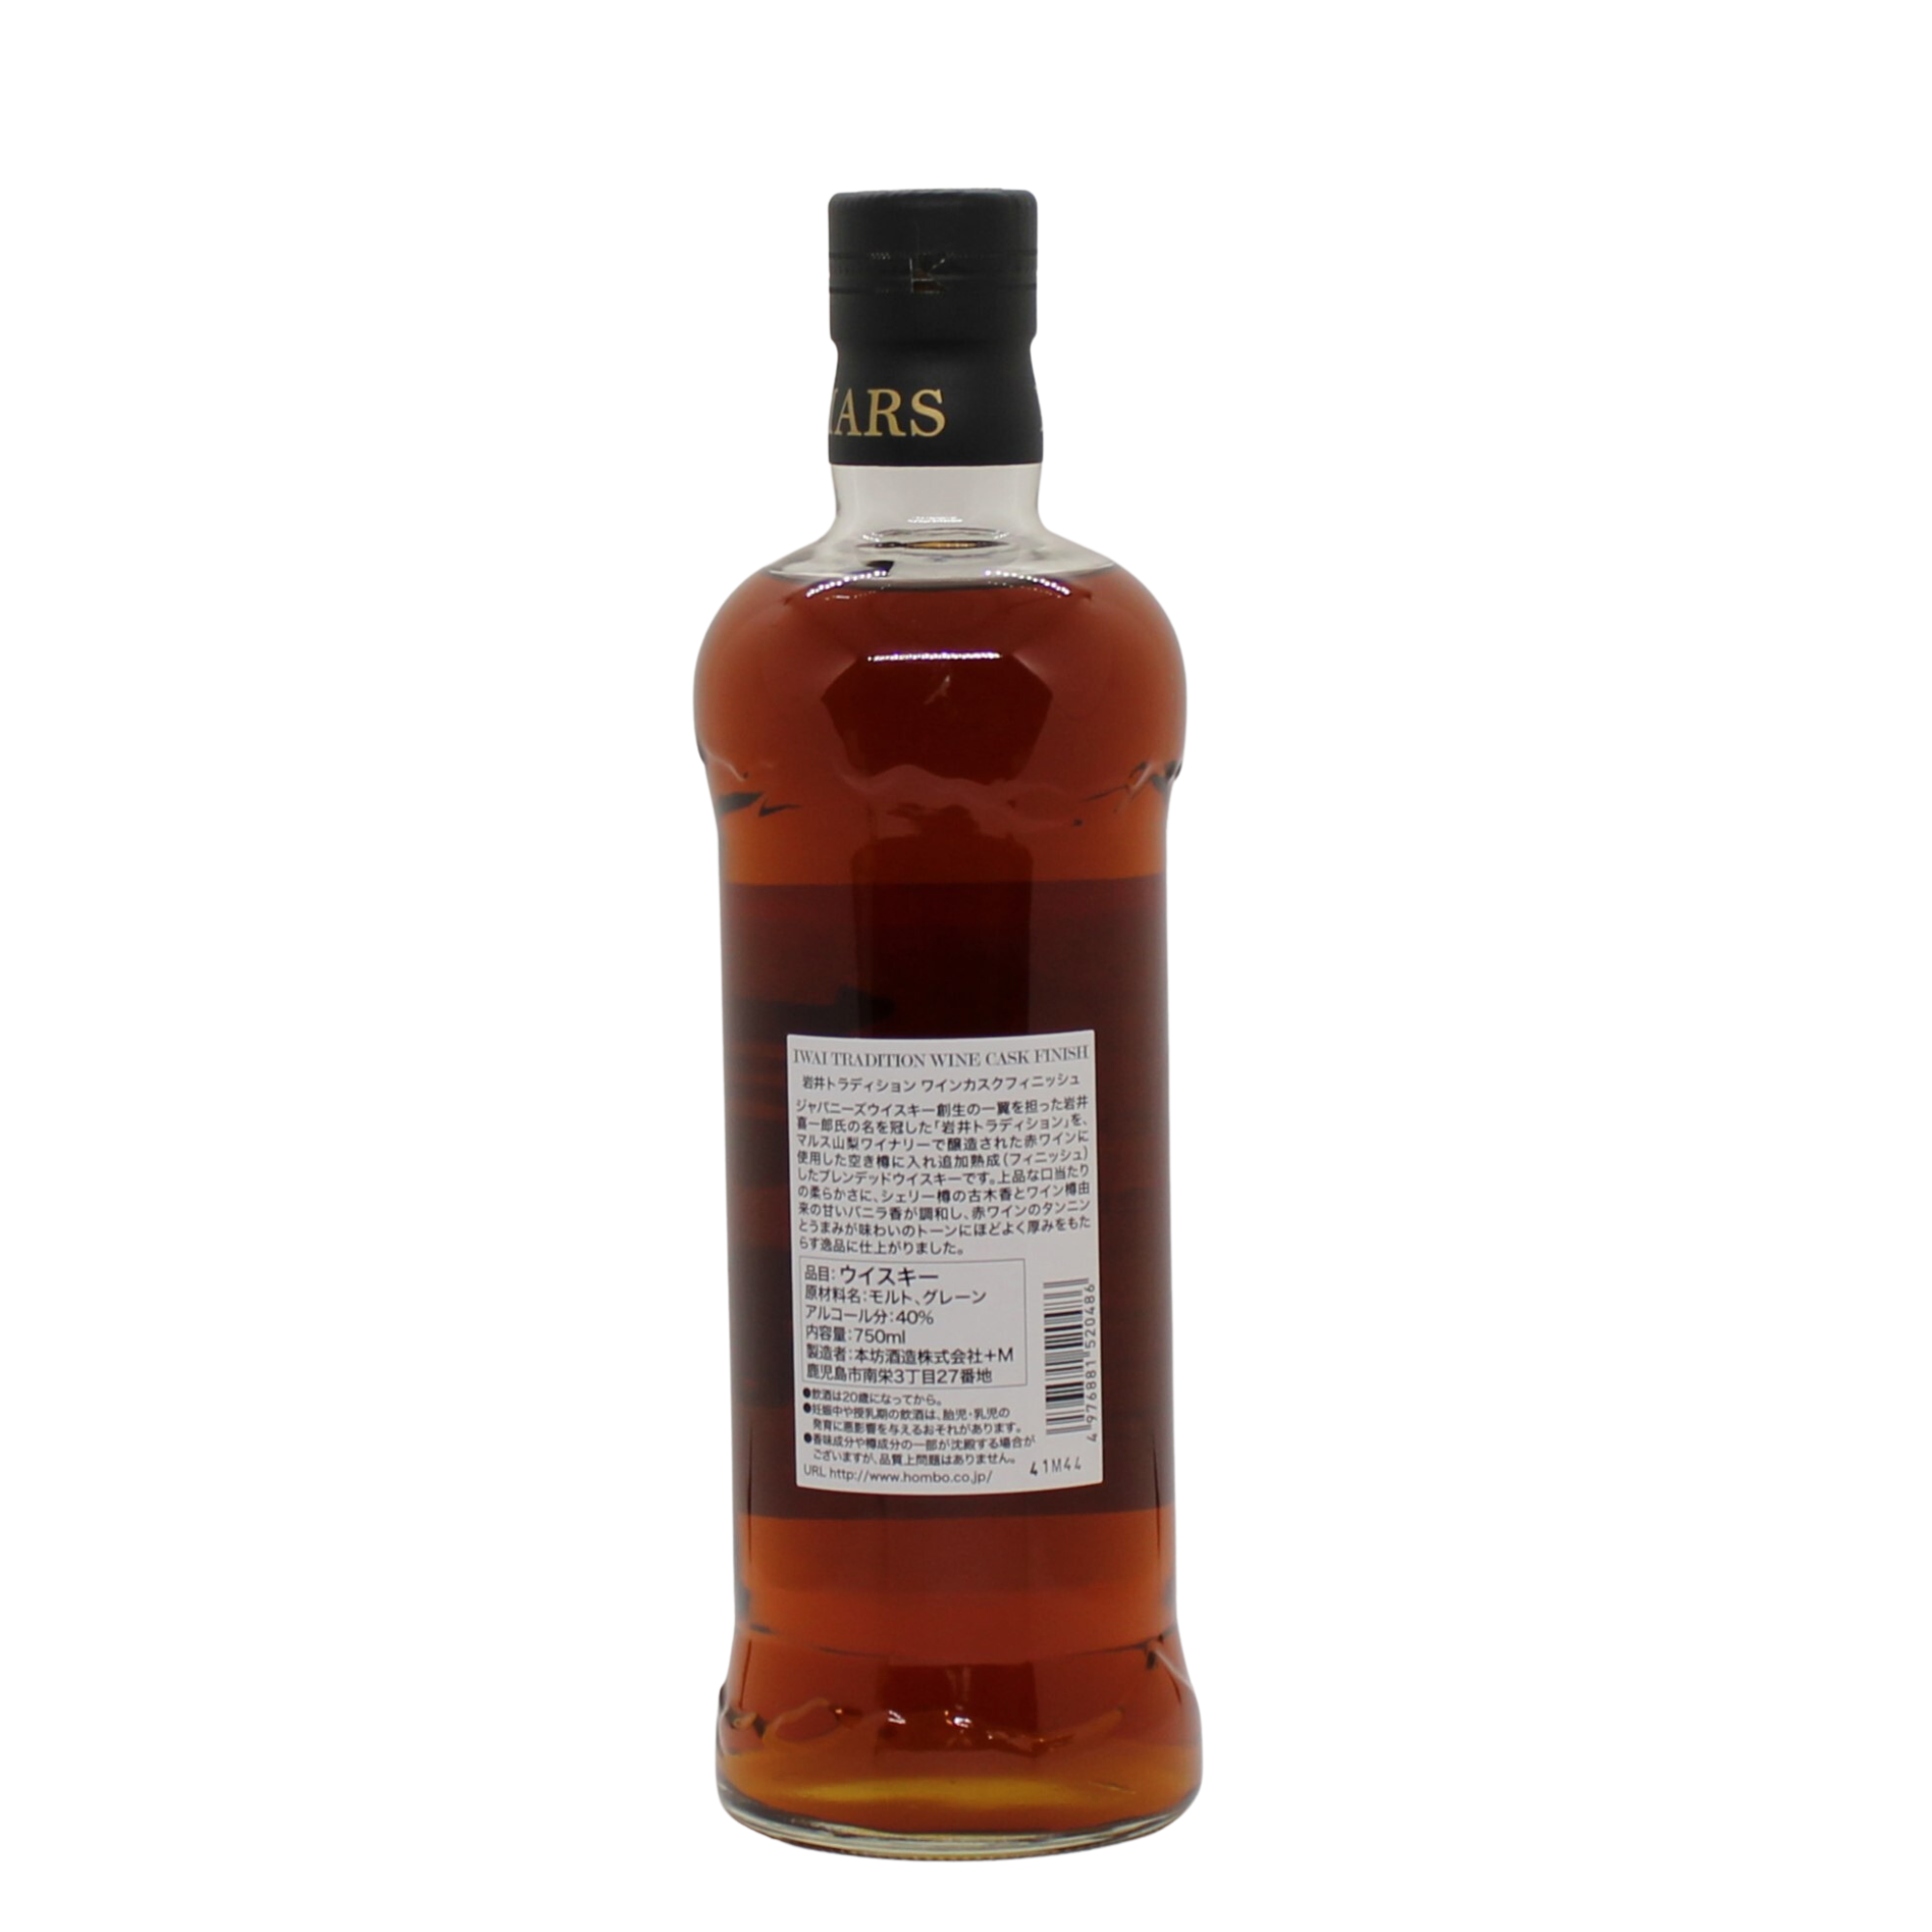 Mars Iwai Tradition Wine Cask Blended Whisky